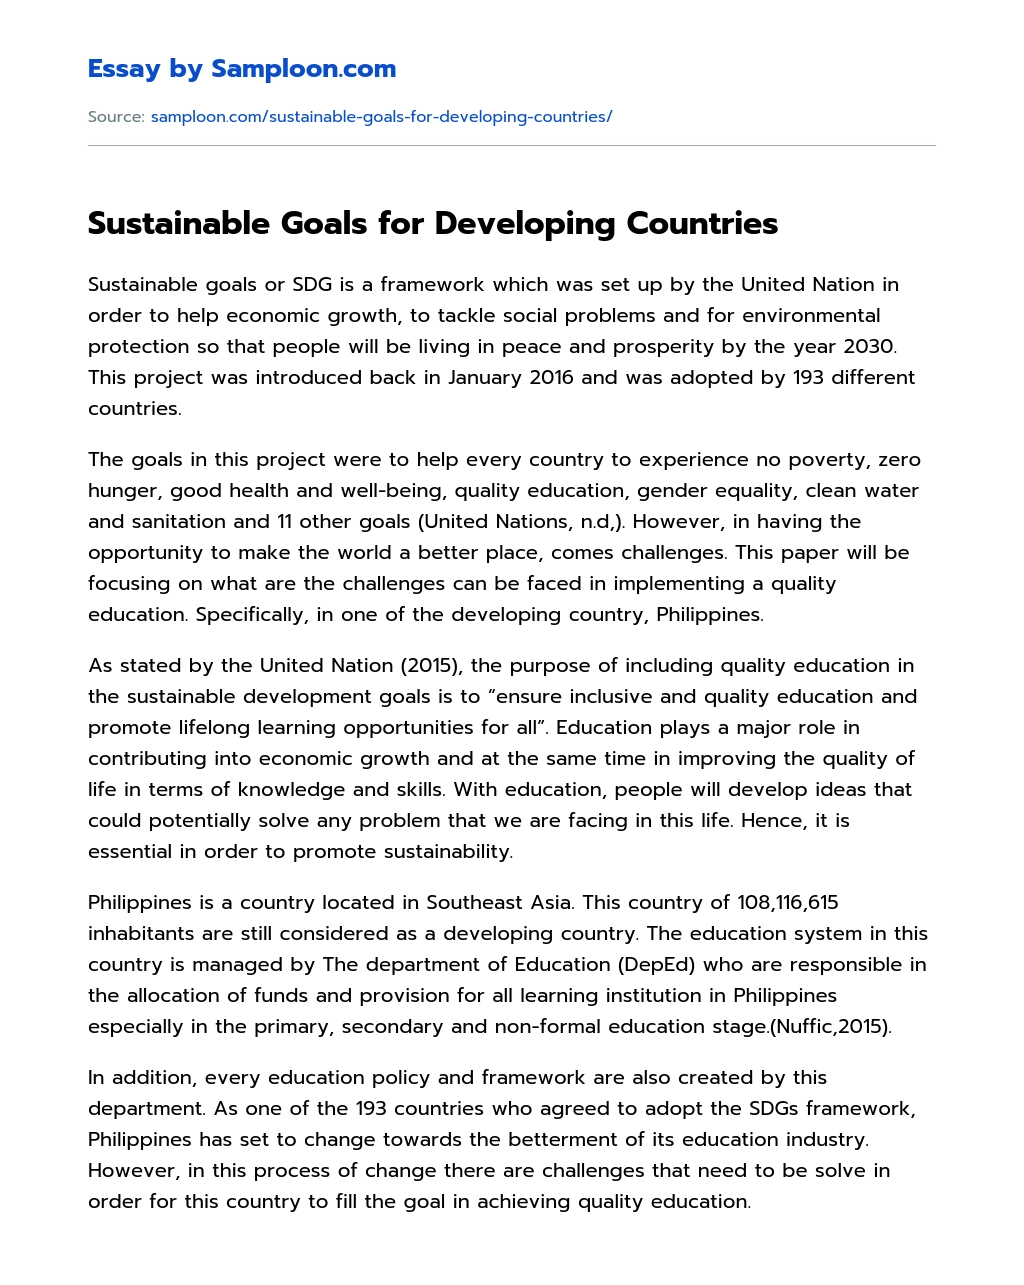 Sustainable Goals for Developing Countries essay